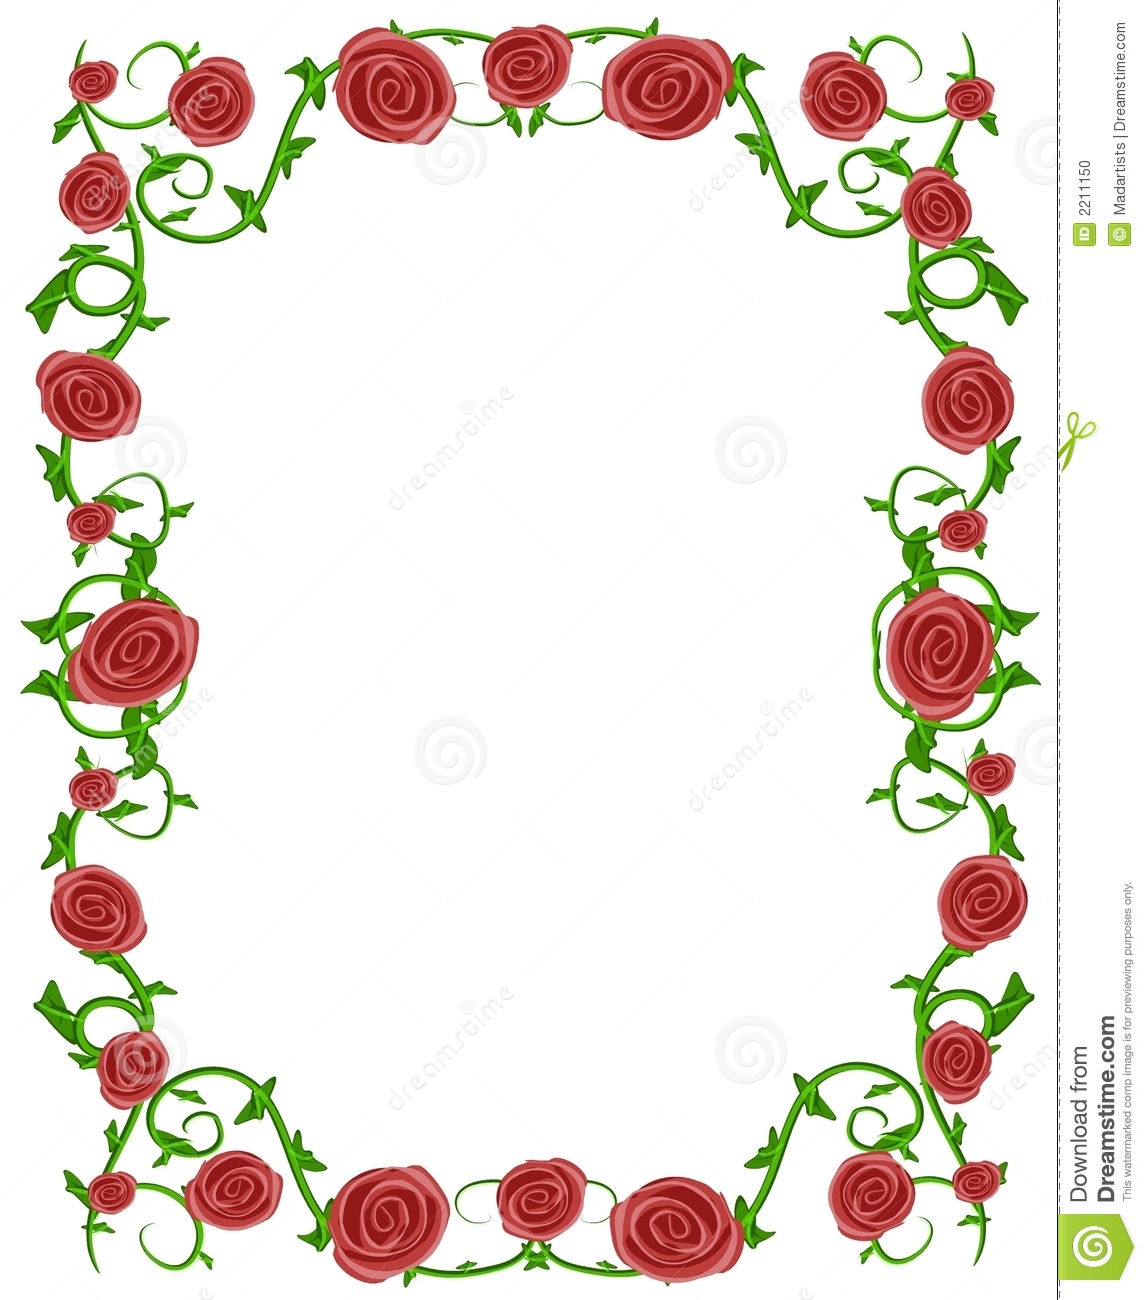 Red And Pink Roses Frame Border For Creating Borders On Paper Or For